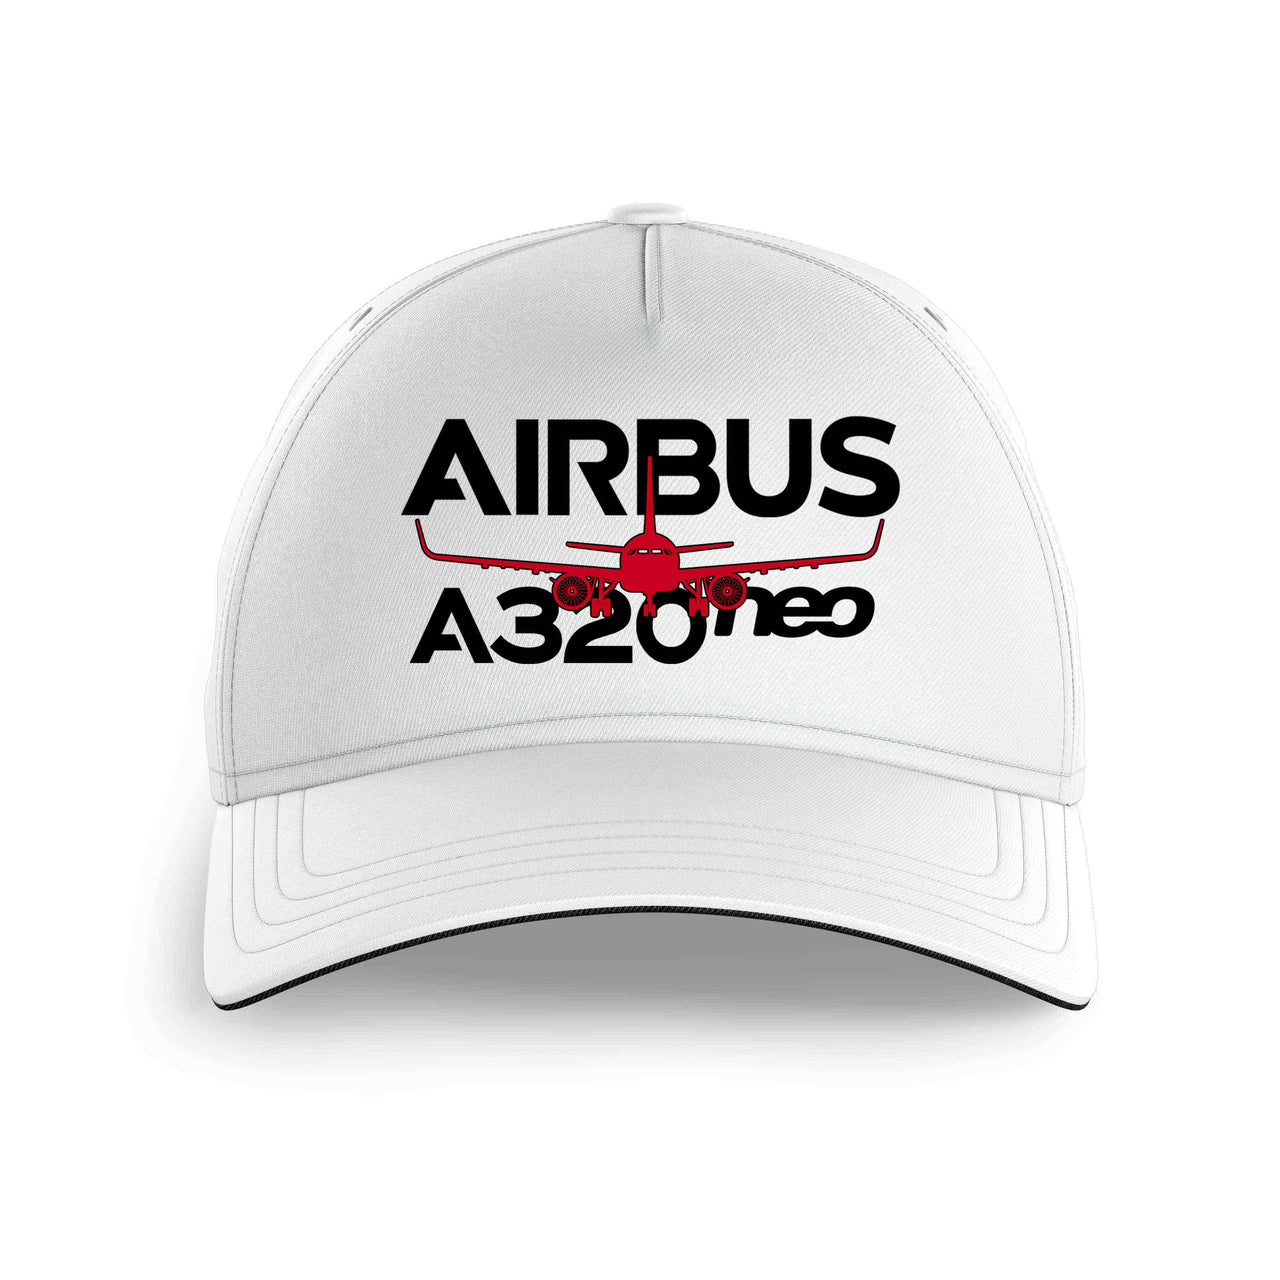 Amazing Airbus A320neo Printed Hats